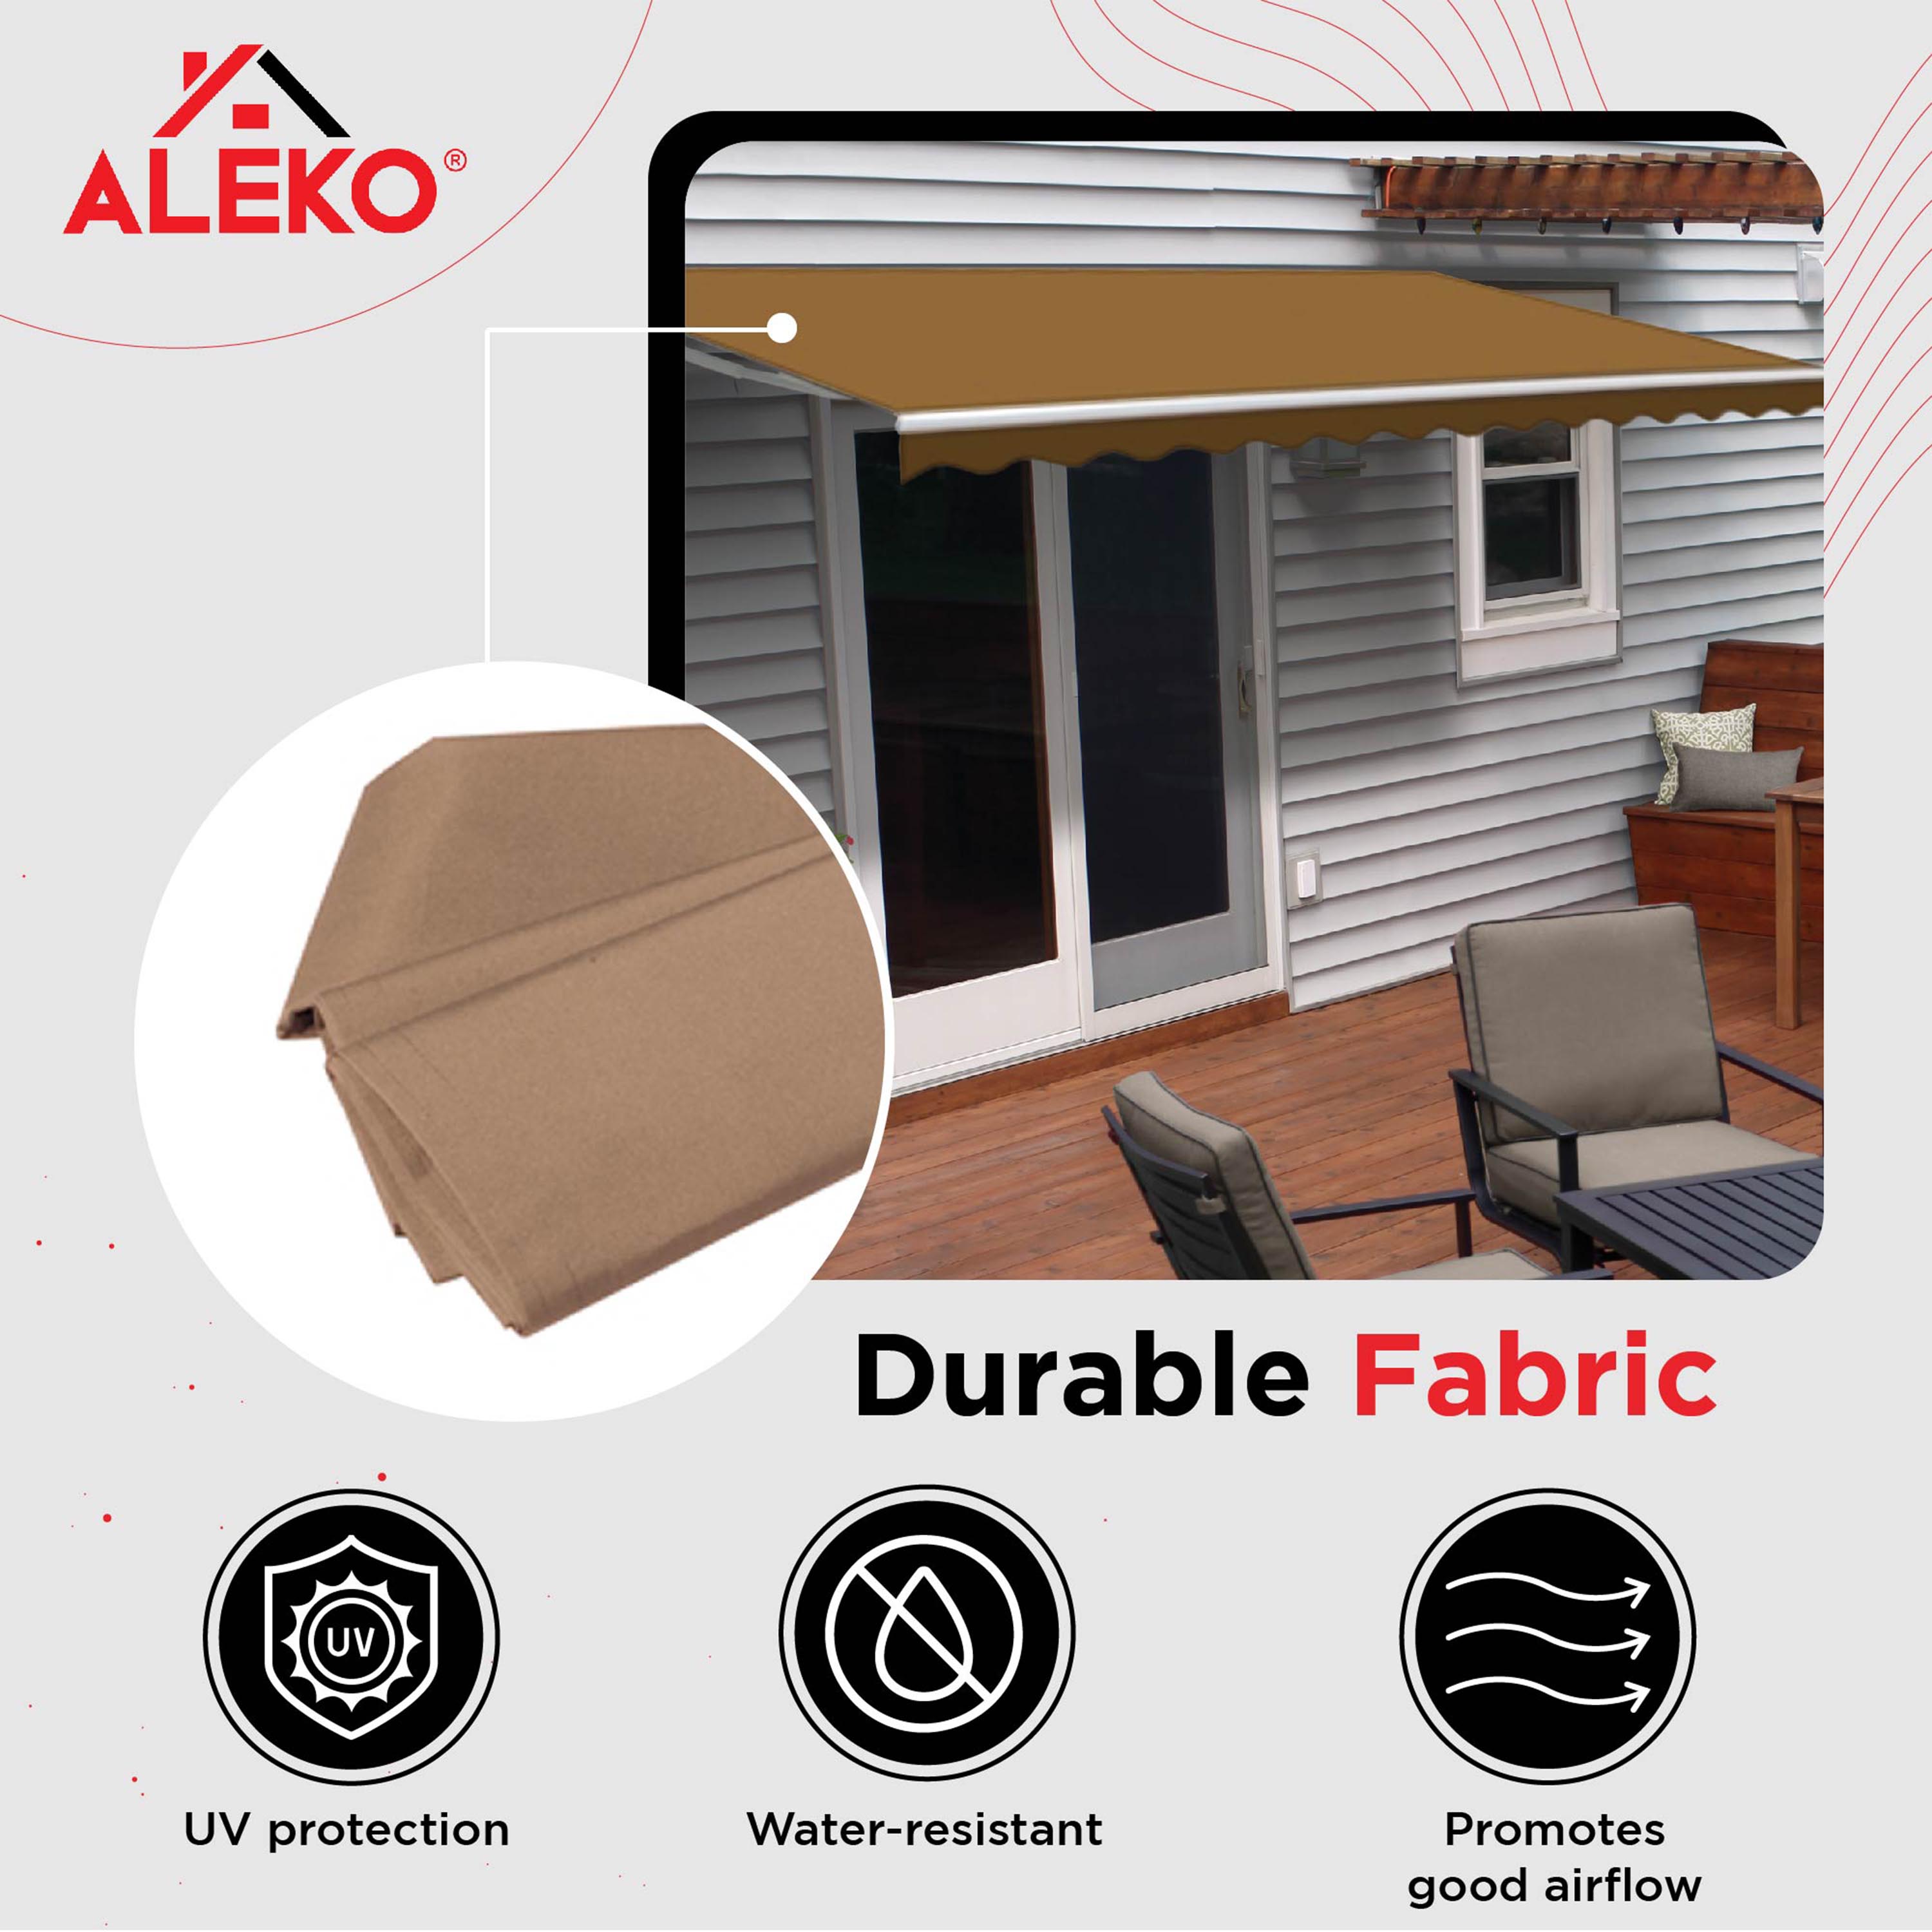 ALEKO 20' x 10' Retractable Motorized Patio Awning, Sand Color - image 3 of 14